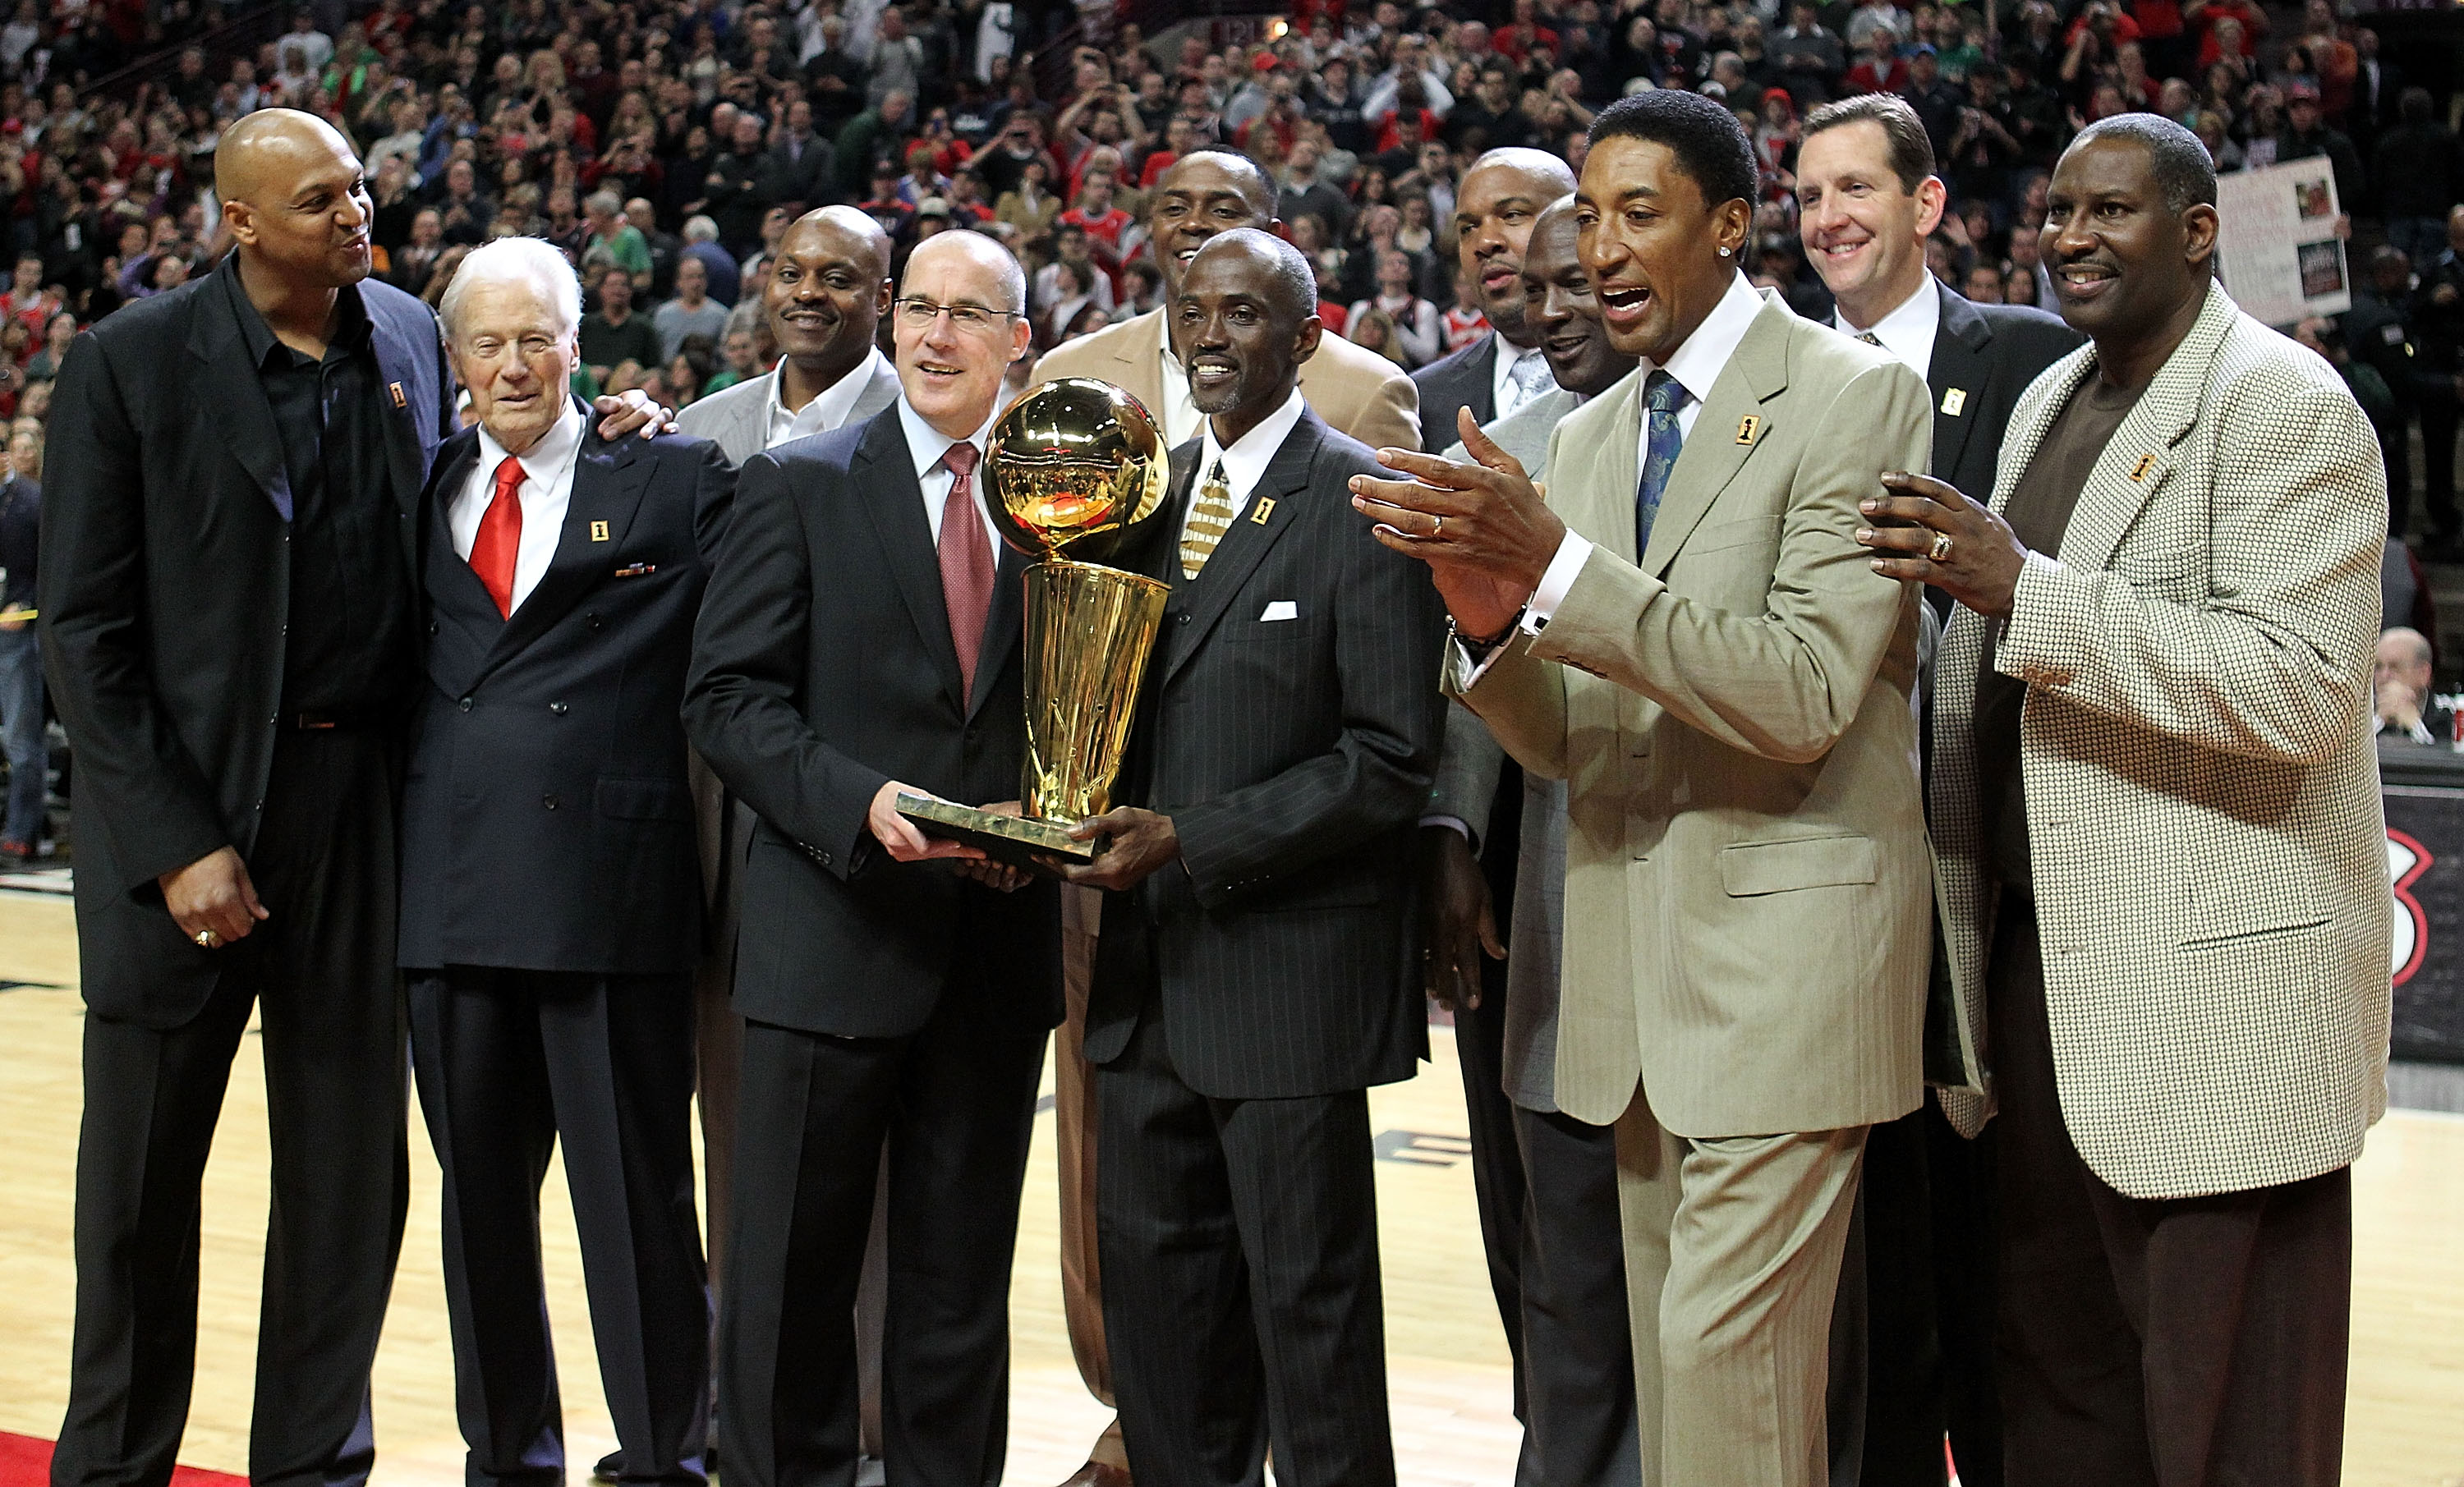 Michael Jordan and the rest of the 1990-91 Chicago Bulls celebrate the 20th anniversary of their first championship